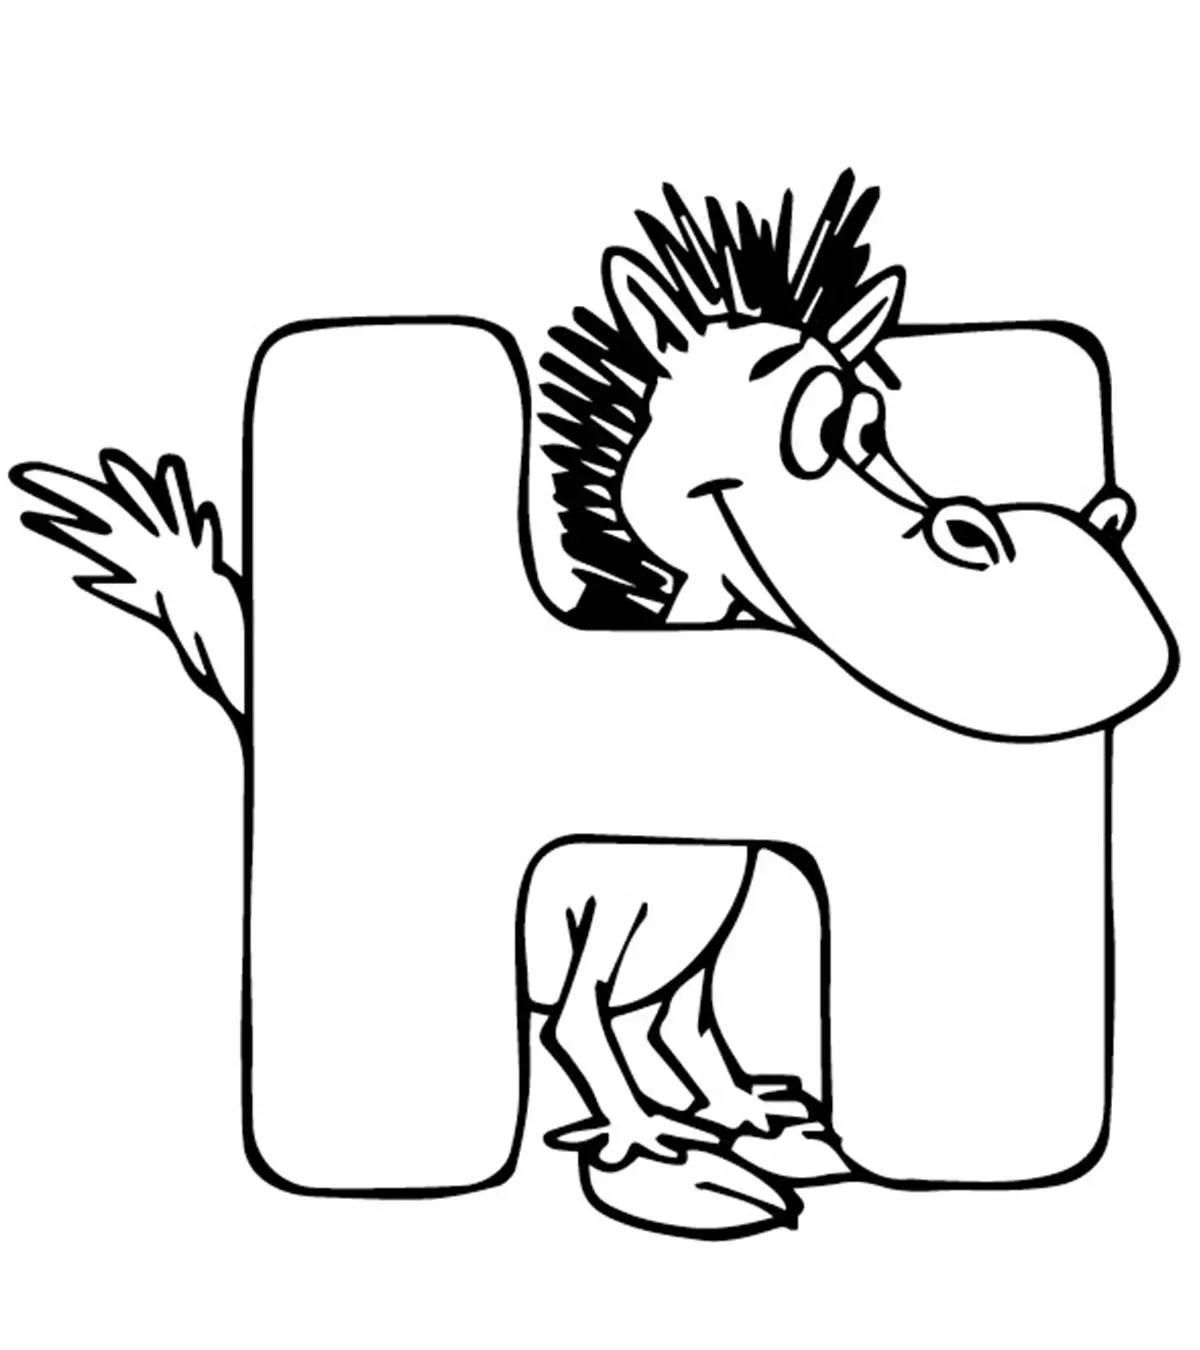 Top 25 Letter ‘H’ Coloring Pages Your Toddler Will Love To Learn & Color